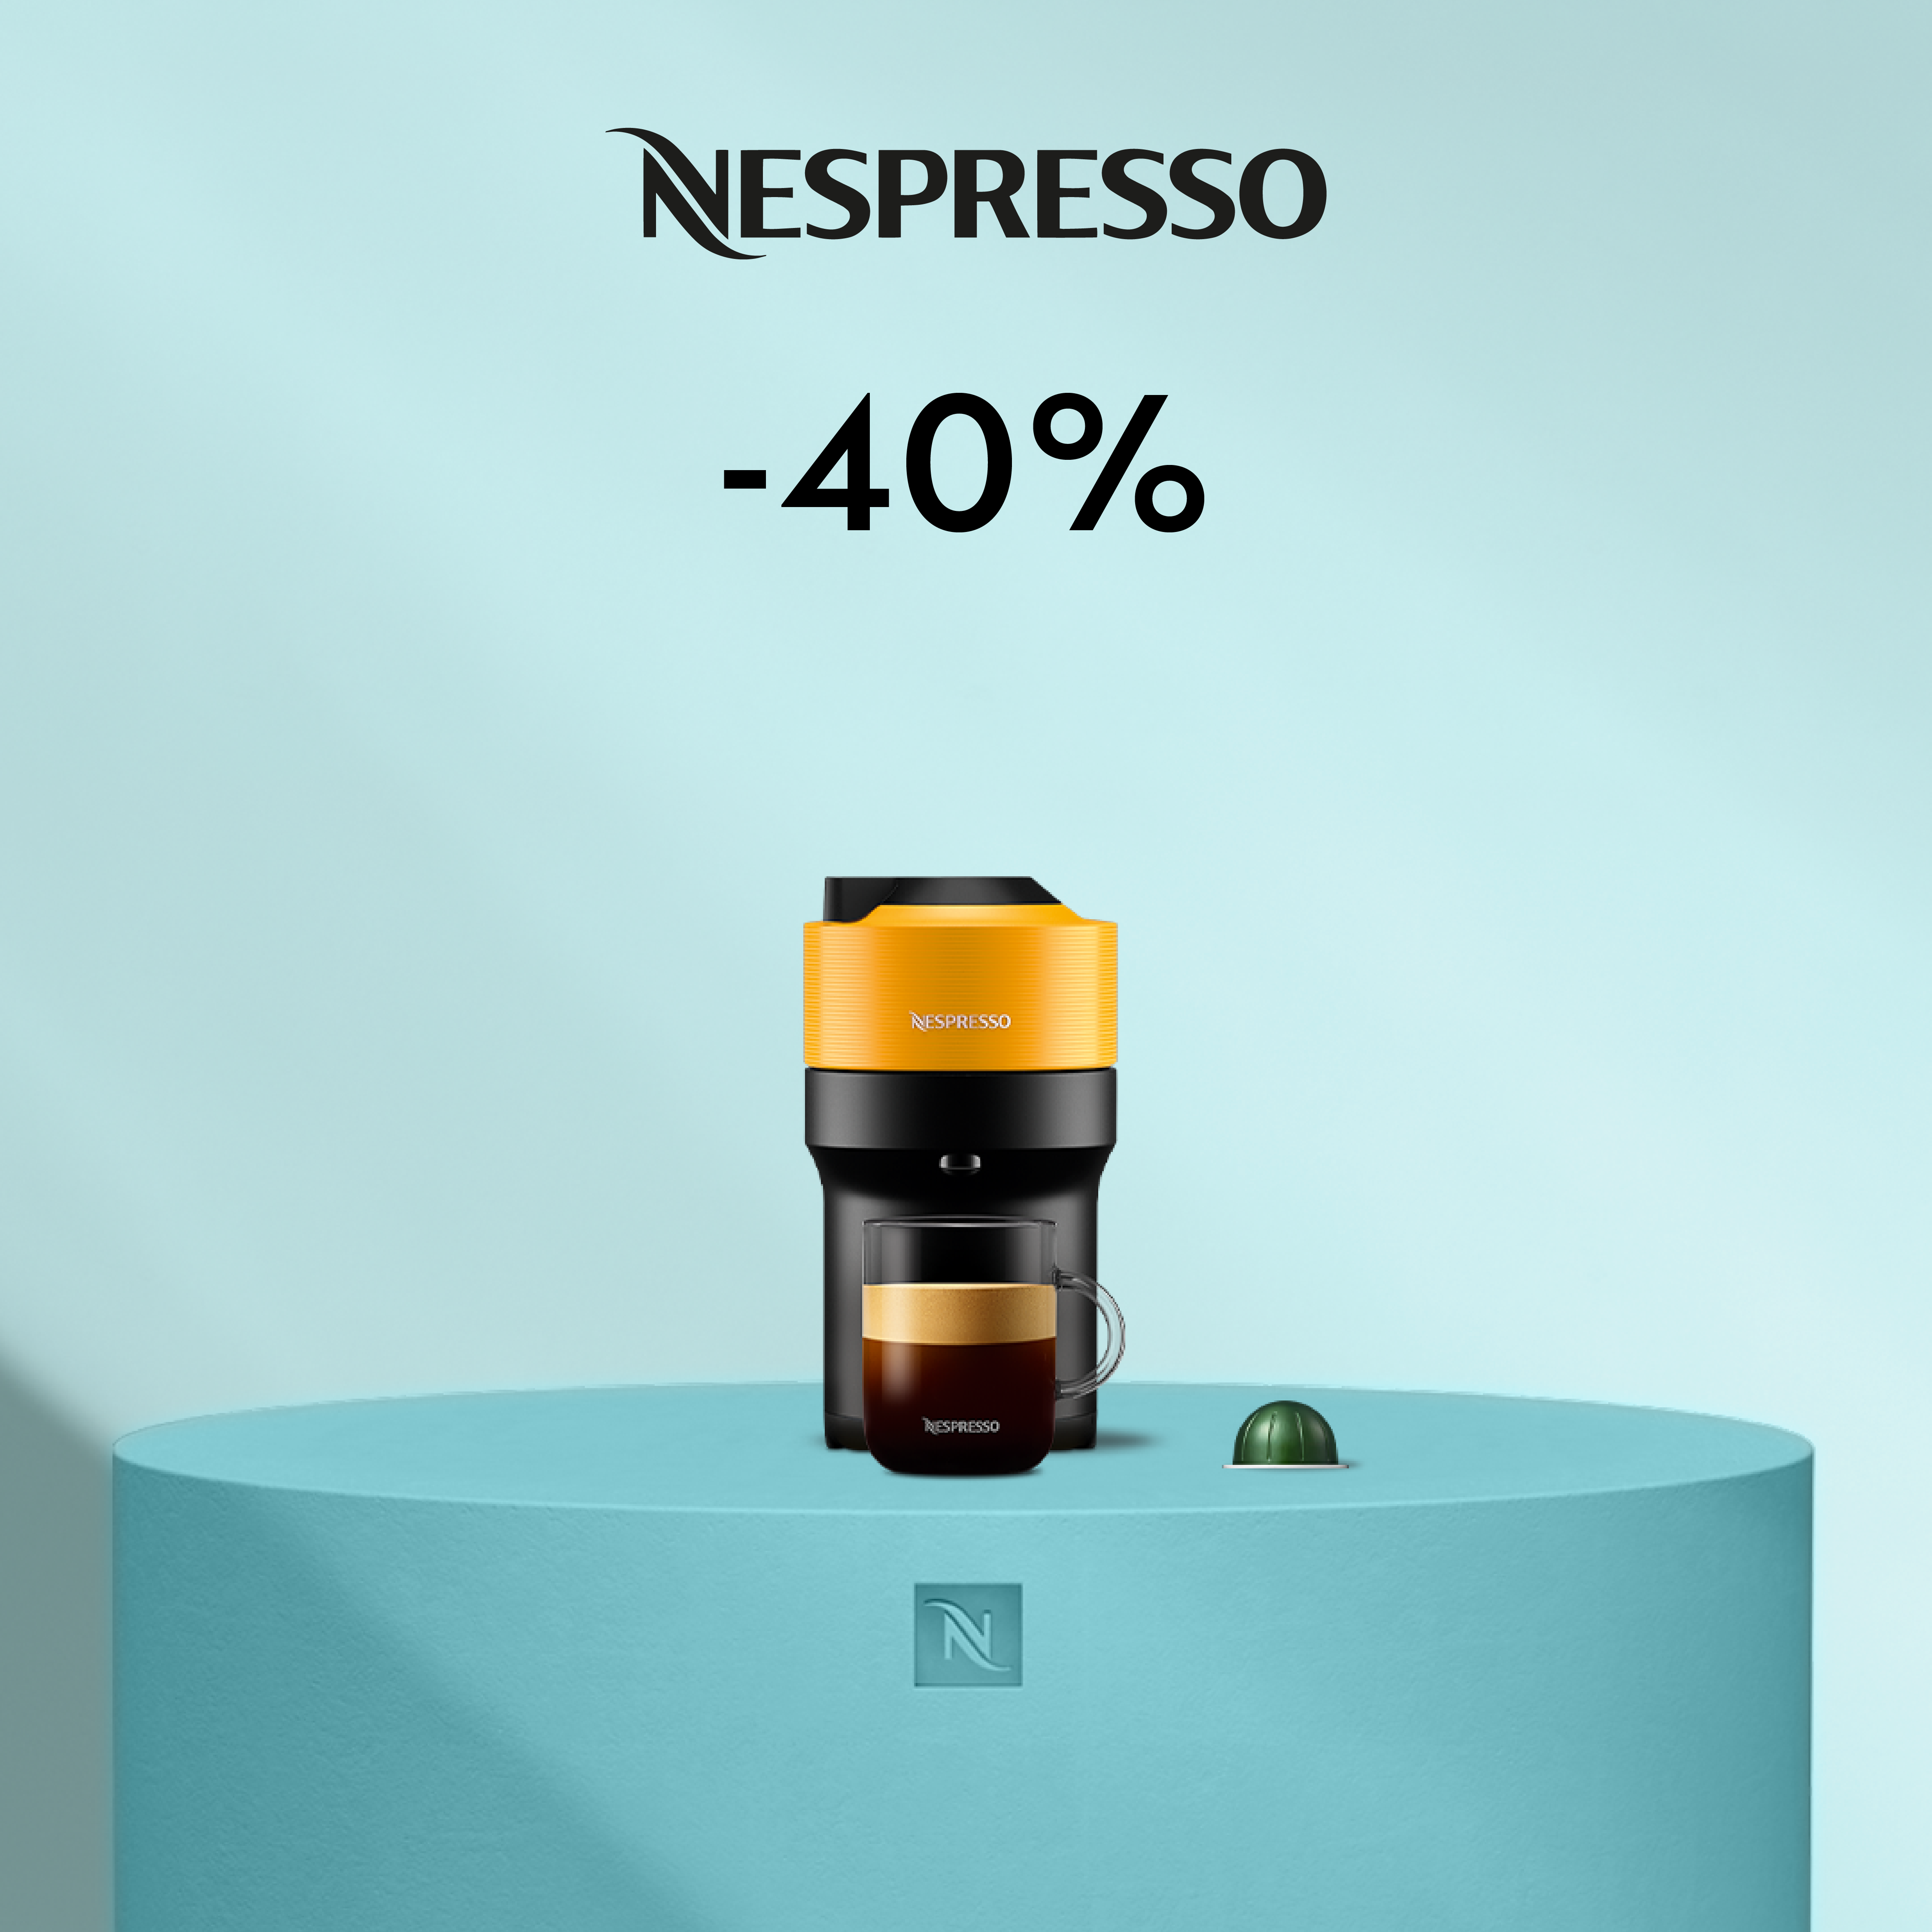 40% DISCOUNT ON THE VERTUO POP COFFEE MACHINE WHEN YOU BUY 80 CAPSULES!